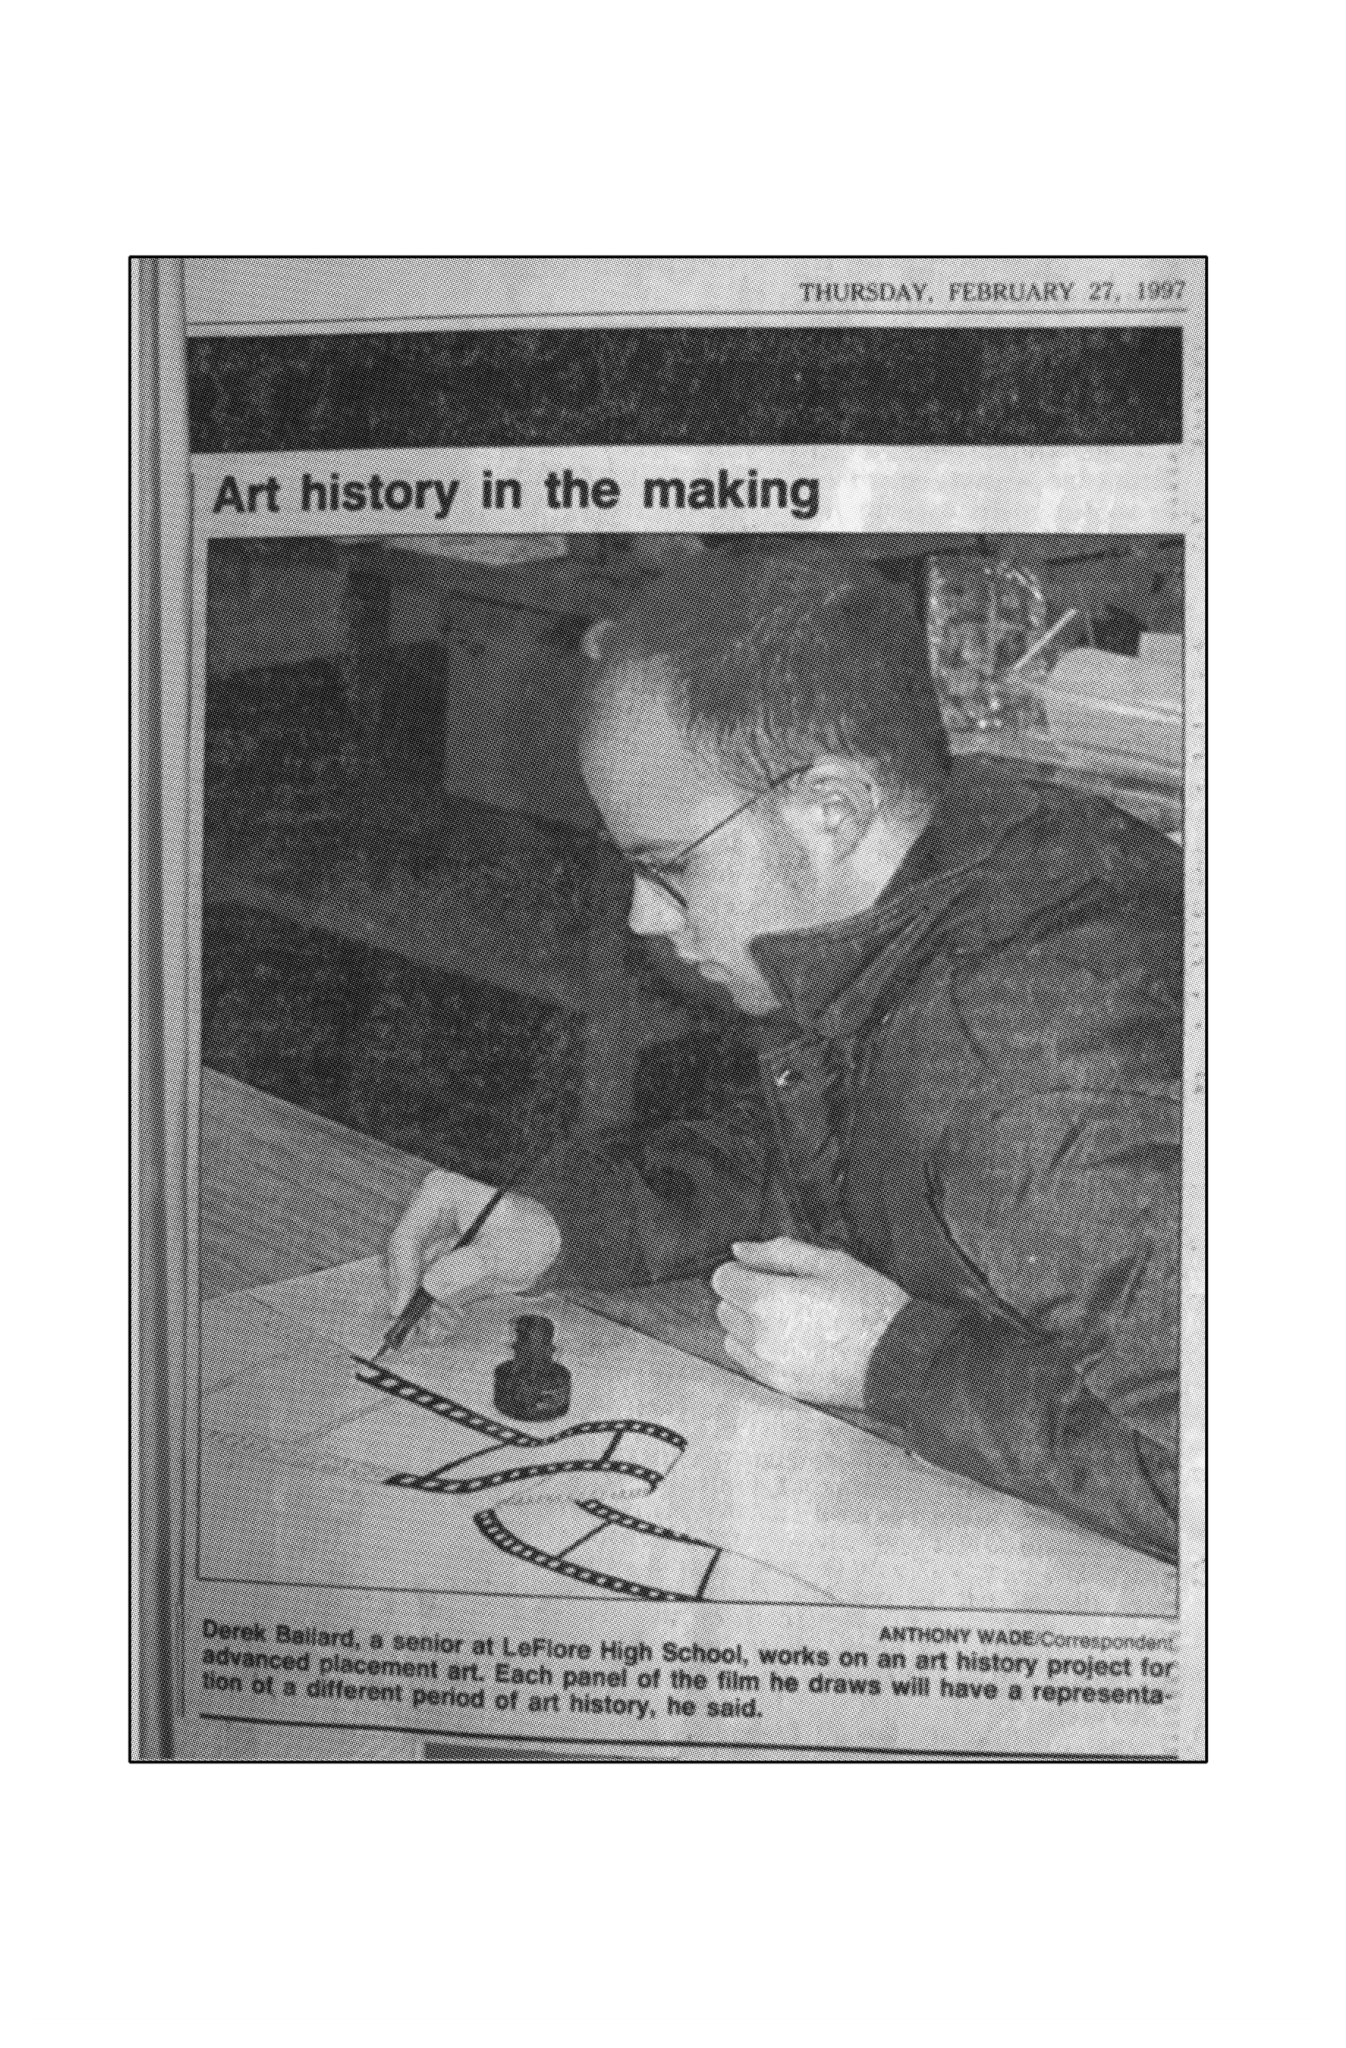 A black and white photograph in a newspaper clipping from Thursday, February 27, 1997, shows a young Derek inking a drawing of a film reel. The heading reads, "Art history in the making" and the photo is credited to "Anthony Wade/Correspondent." The photo is captioned, "Derek Ballard, a senior at LeFiore High School, works on an art history project for advanced placement art. Each panel of the film he draws will have a representation of a different period of art history, he said."